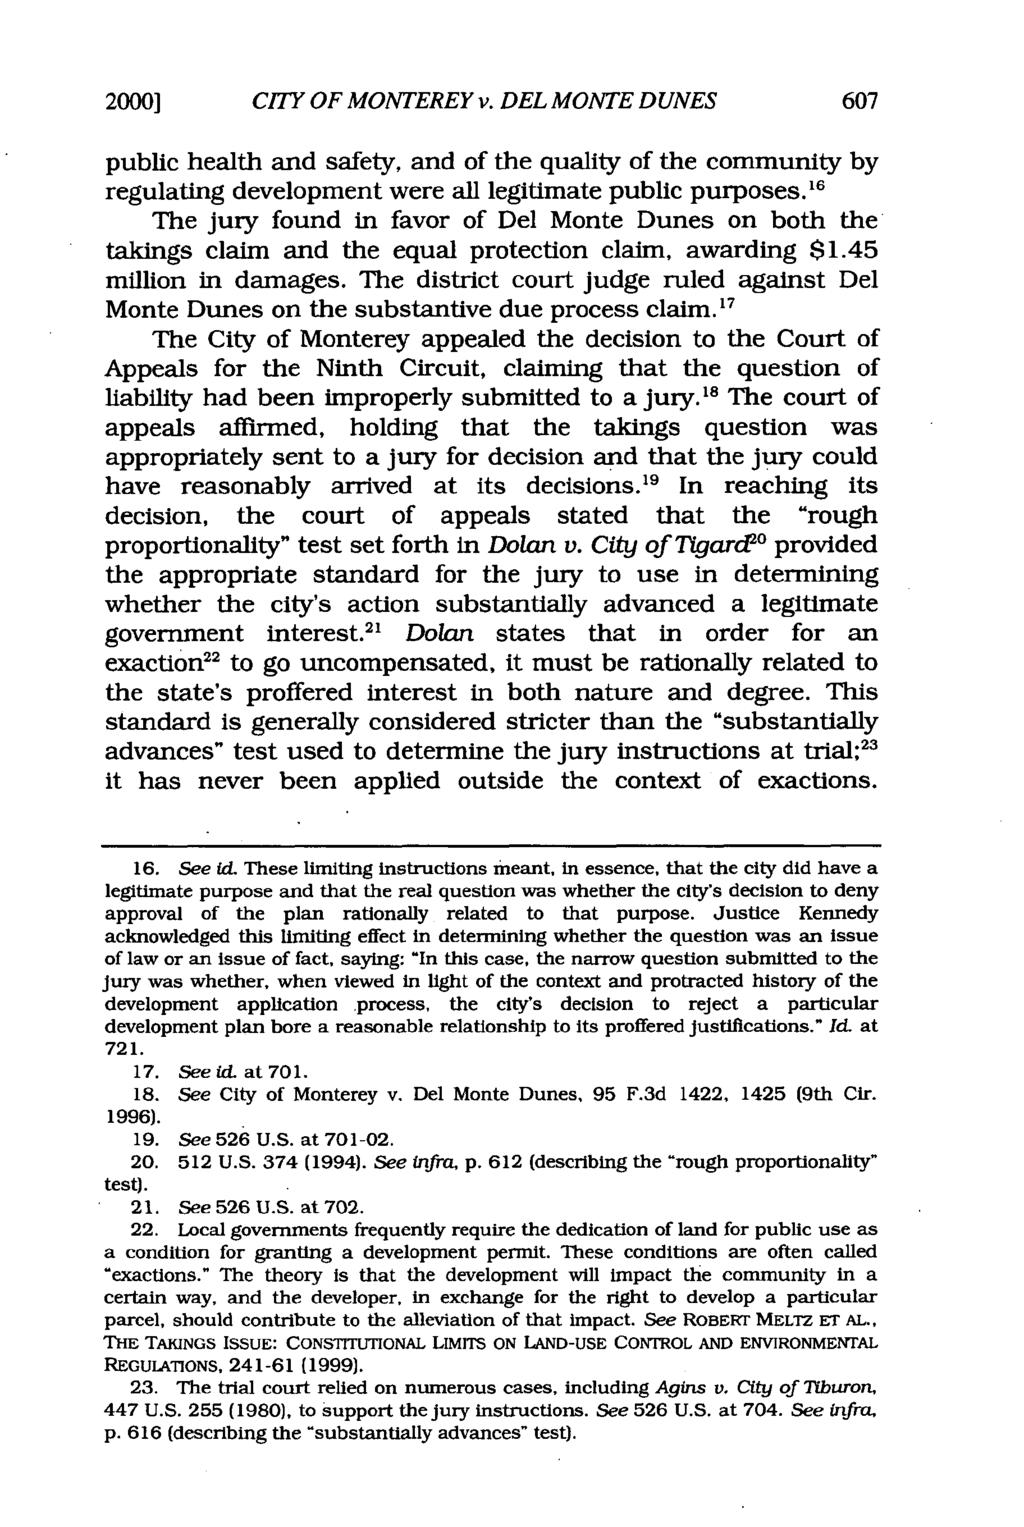 2000] CITY OF MONTEREY v. DEL MONTE DUNES public health and safety, and of the quality of the community by regulating development were all legitimate public purposes.